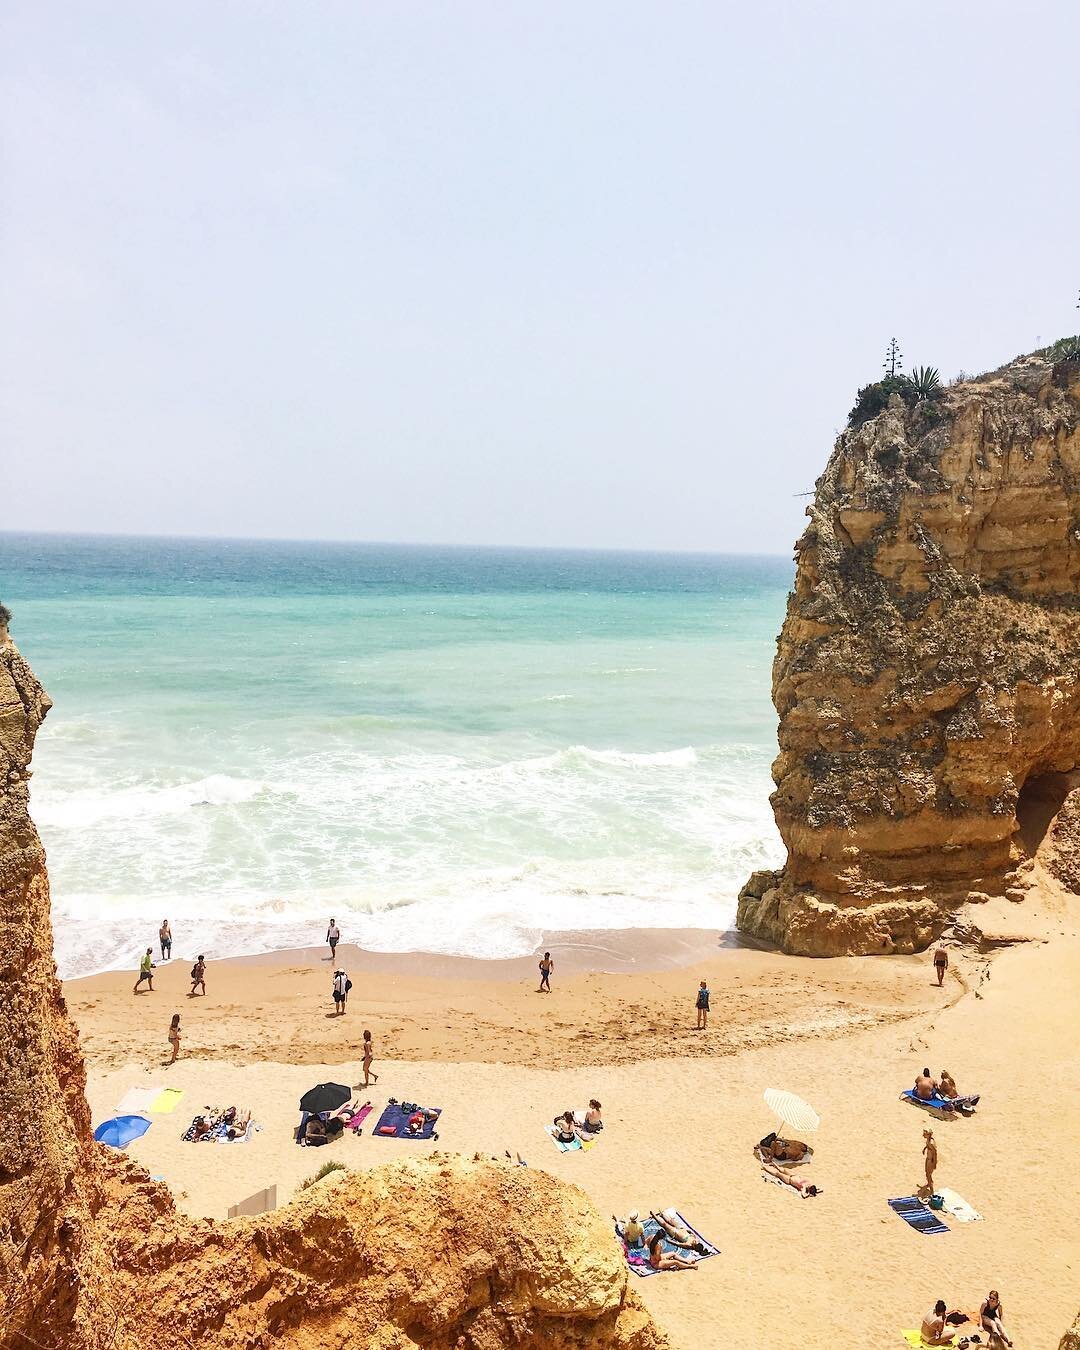 Next stop on our adventure in Portugal: Lagos! Quite possibly the crown jewel of the Algarve. Even with the high number of tourists this sleepy fishing village has retained all of its charm. 🎣 The perfect spot to unwind after a busy city visit to Li